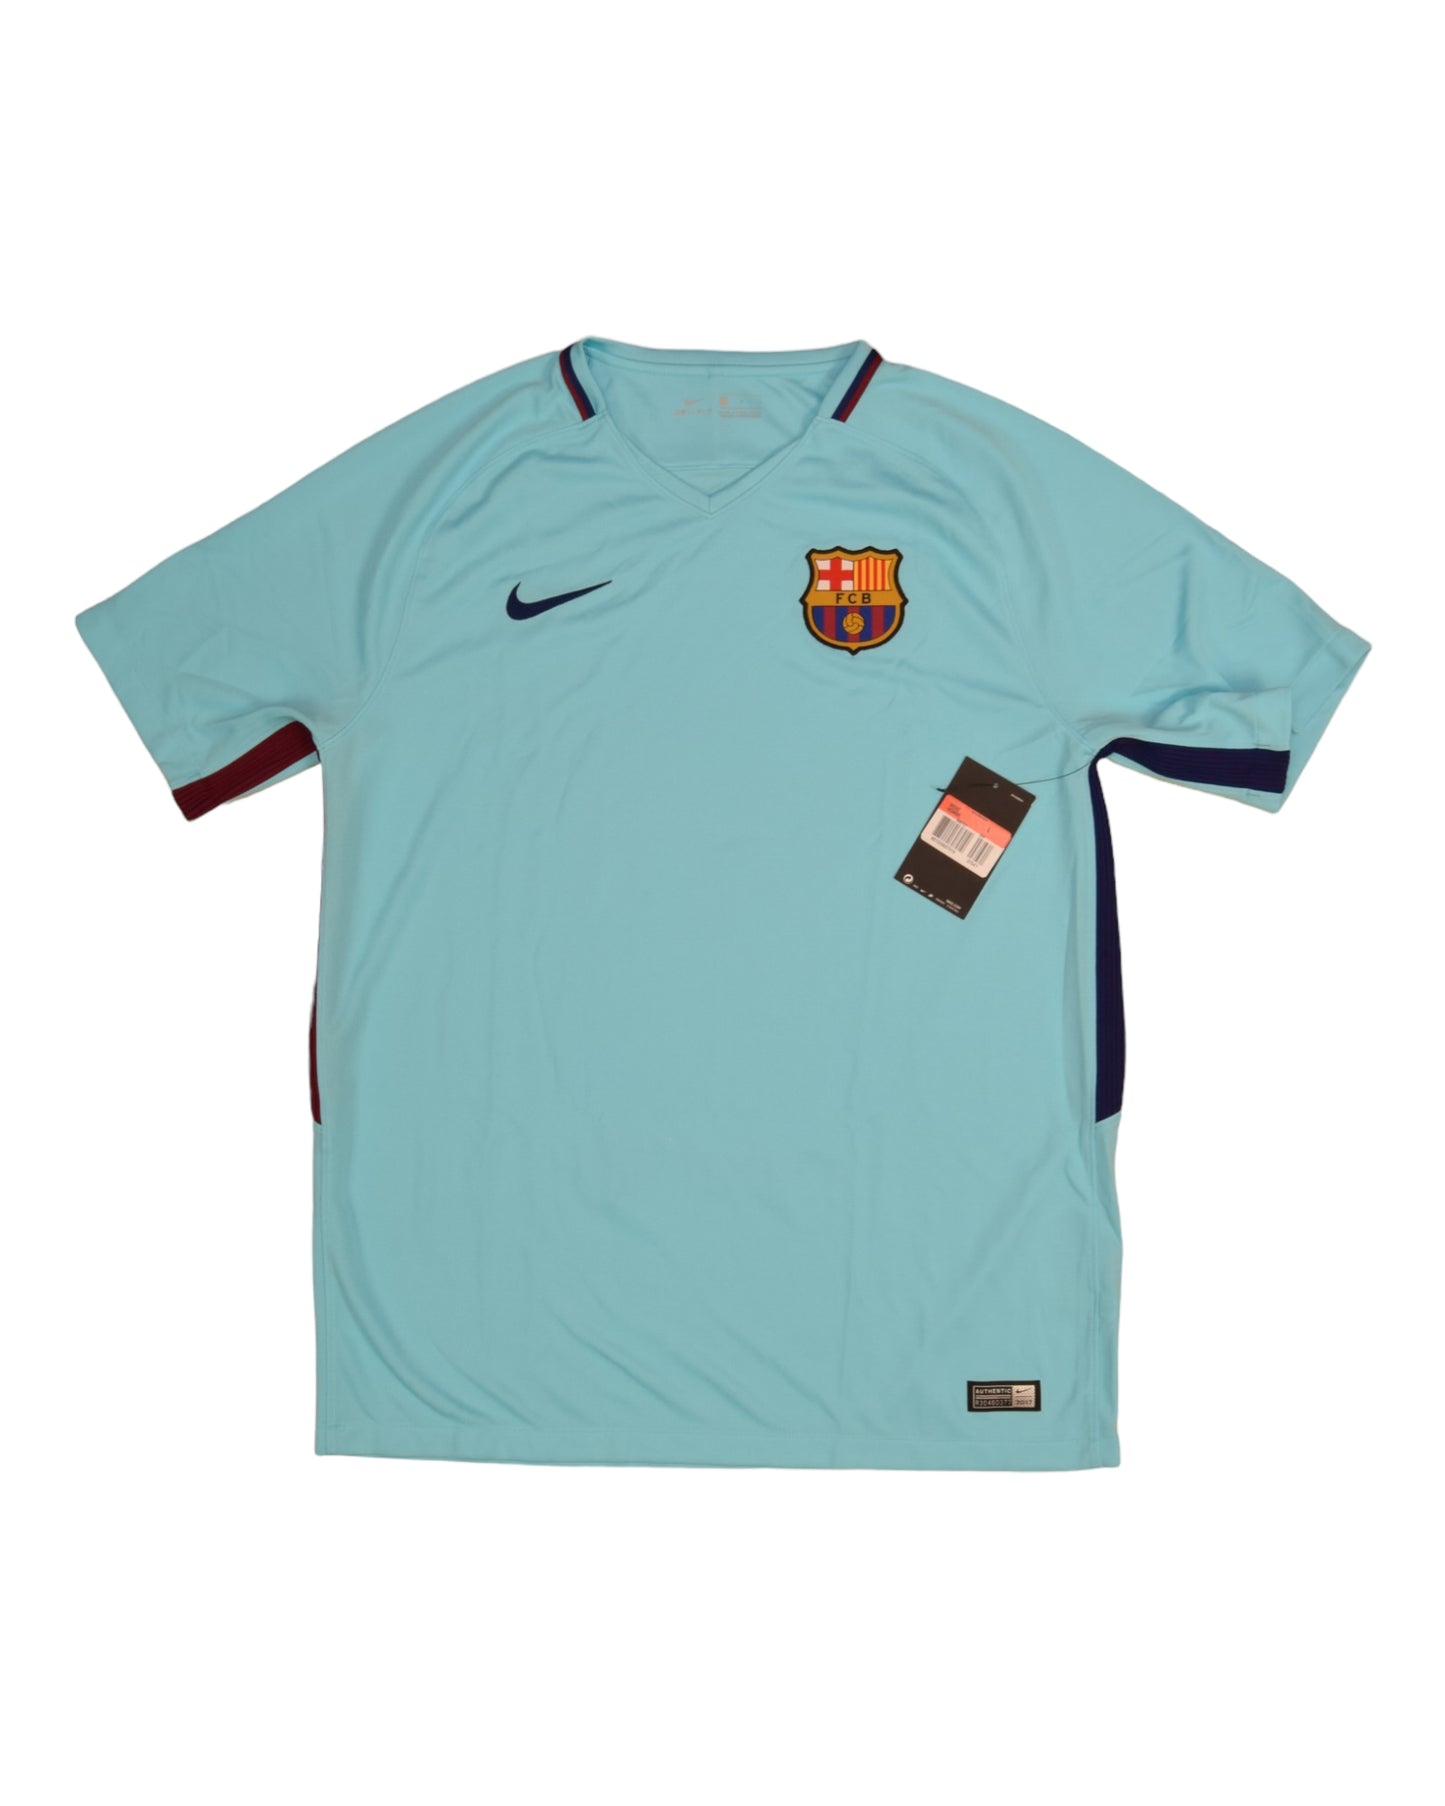 Authentic New FC Barcelona Nike Away Champions League Version Football Shirt 2017-2018 BNWT Deadstock Size L Blue